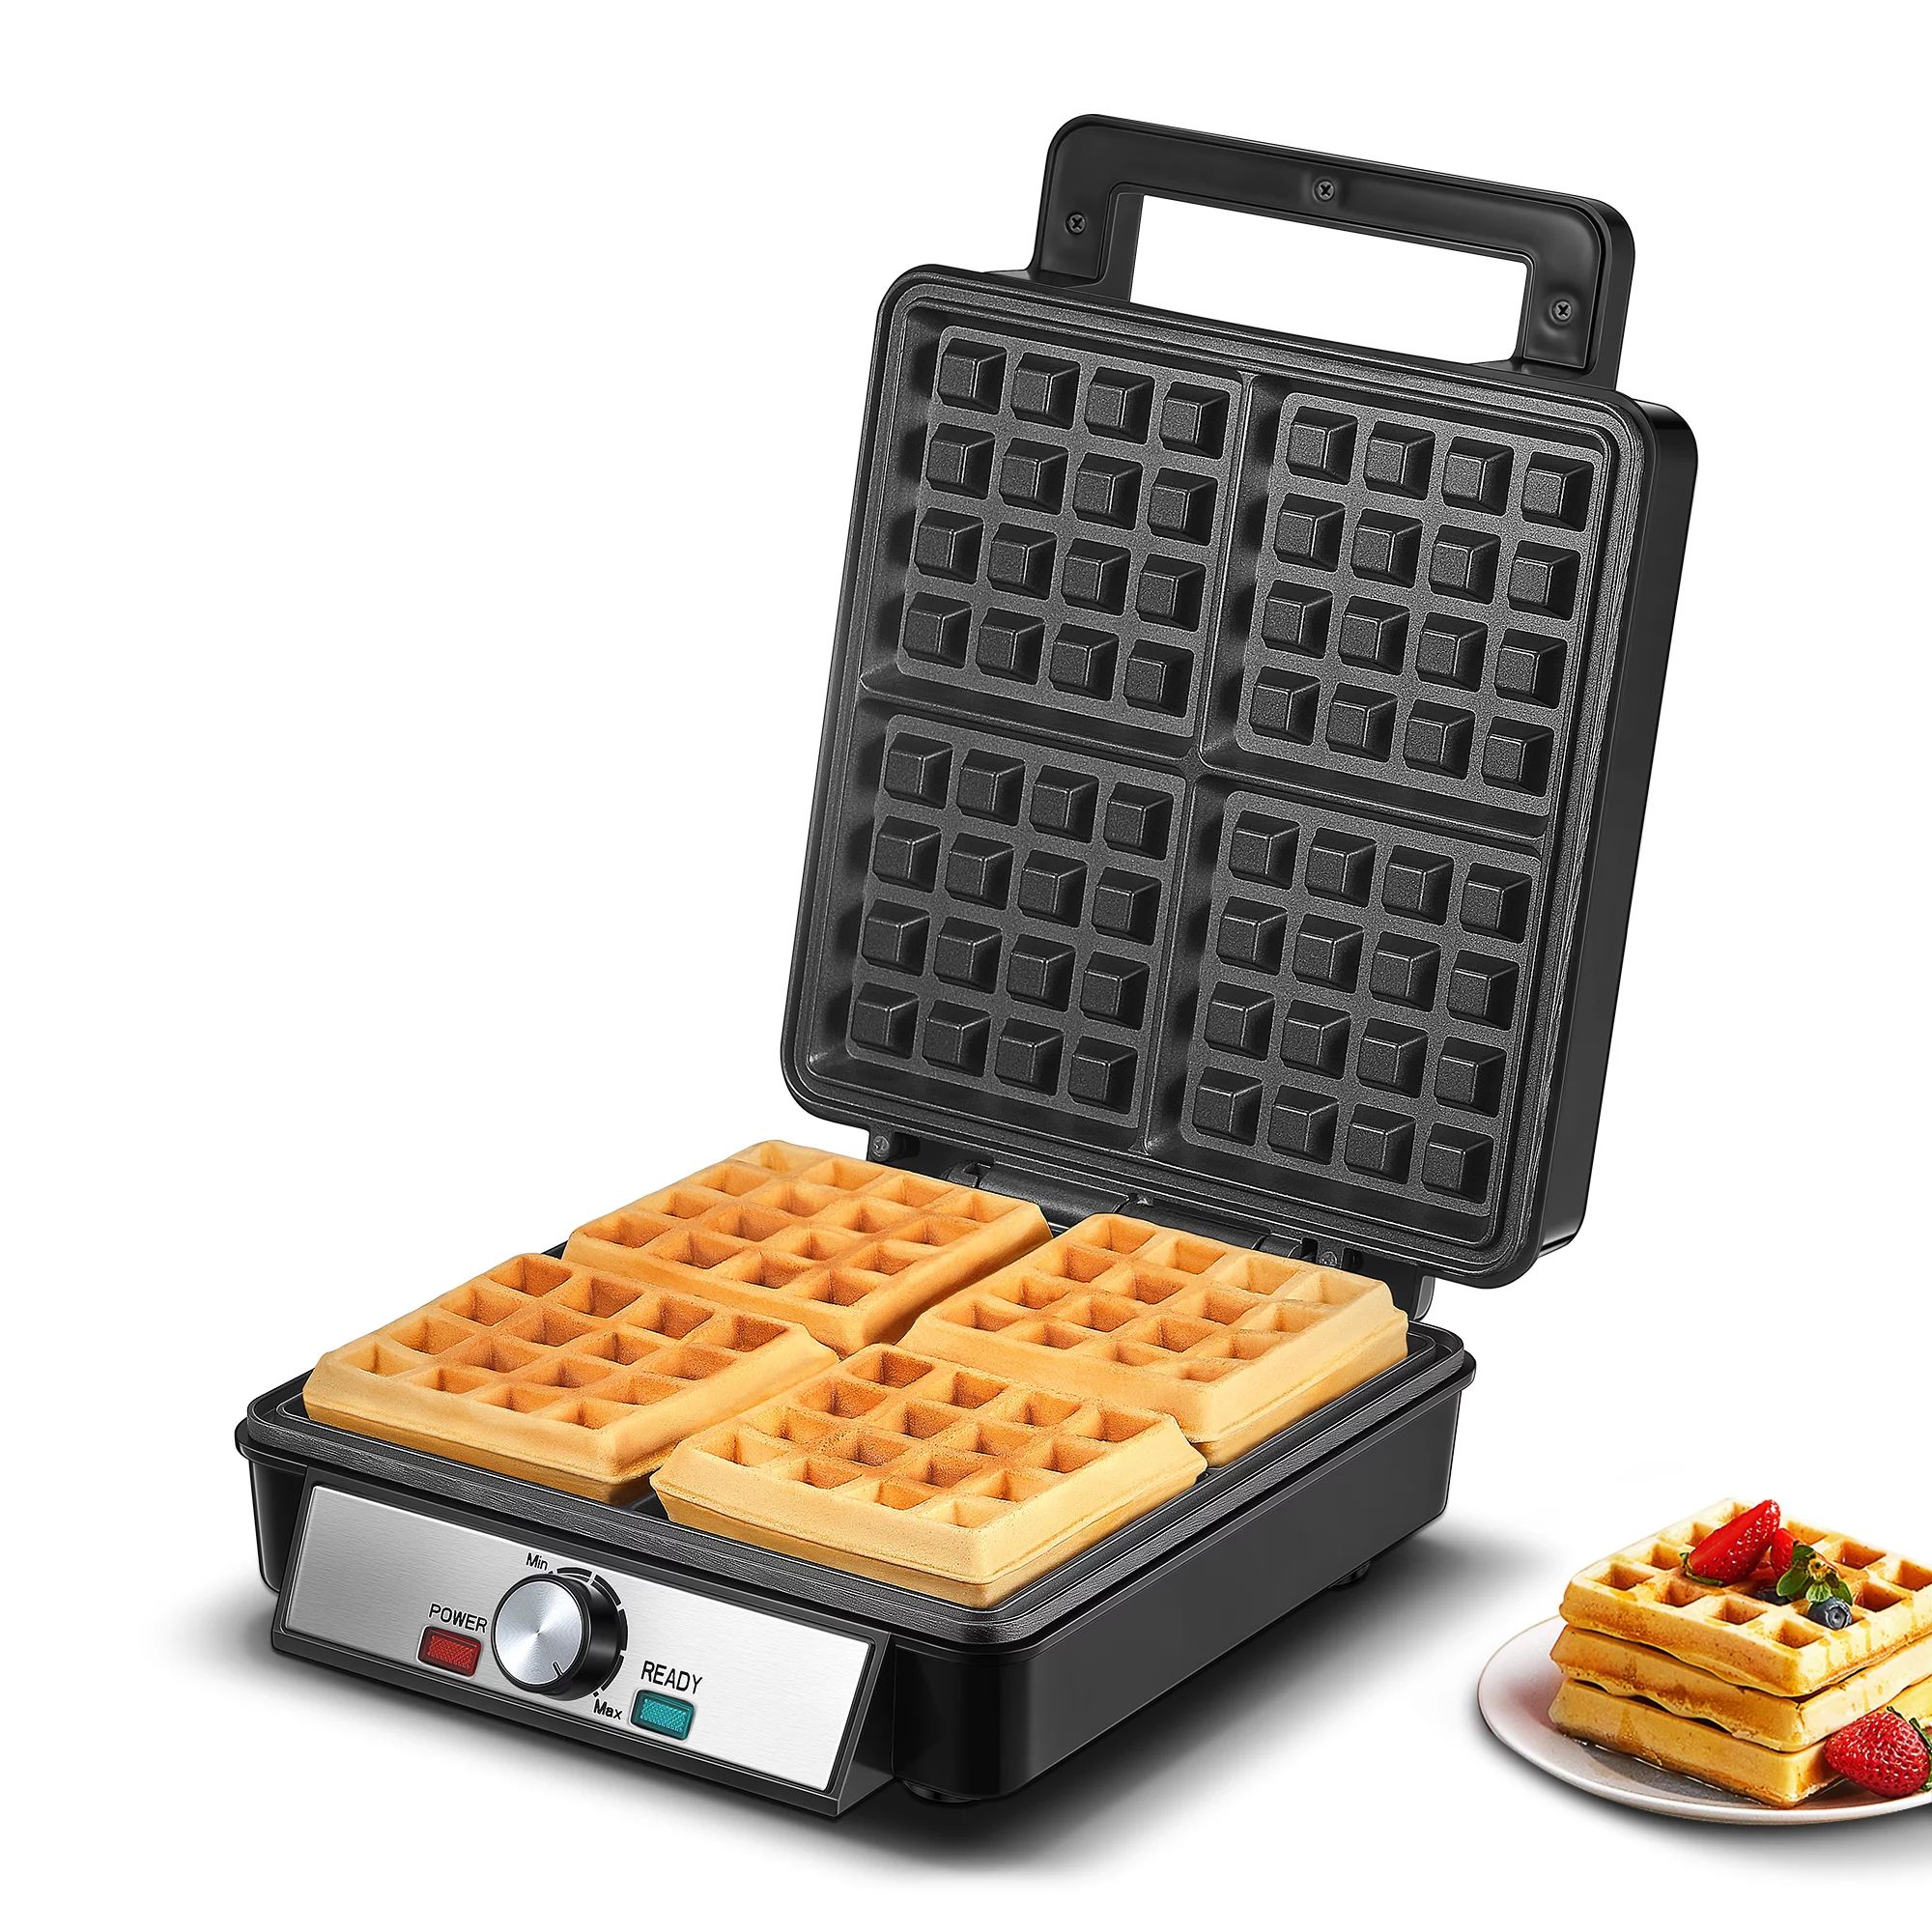 AICOOK Belgian Waffle Maker 4 Slices with Temperature Control, 1200W, Black/Silver | Walmart (US)